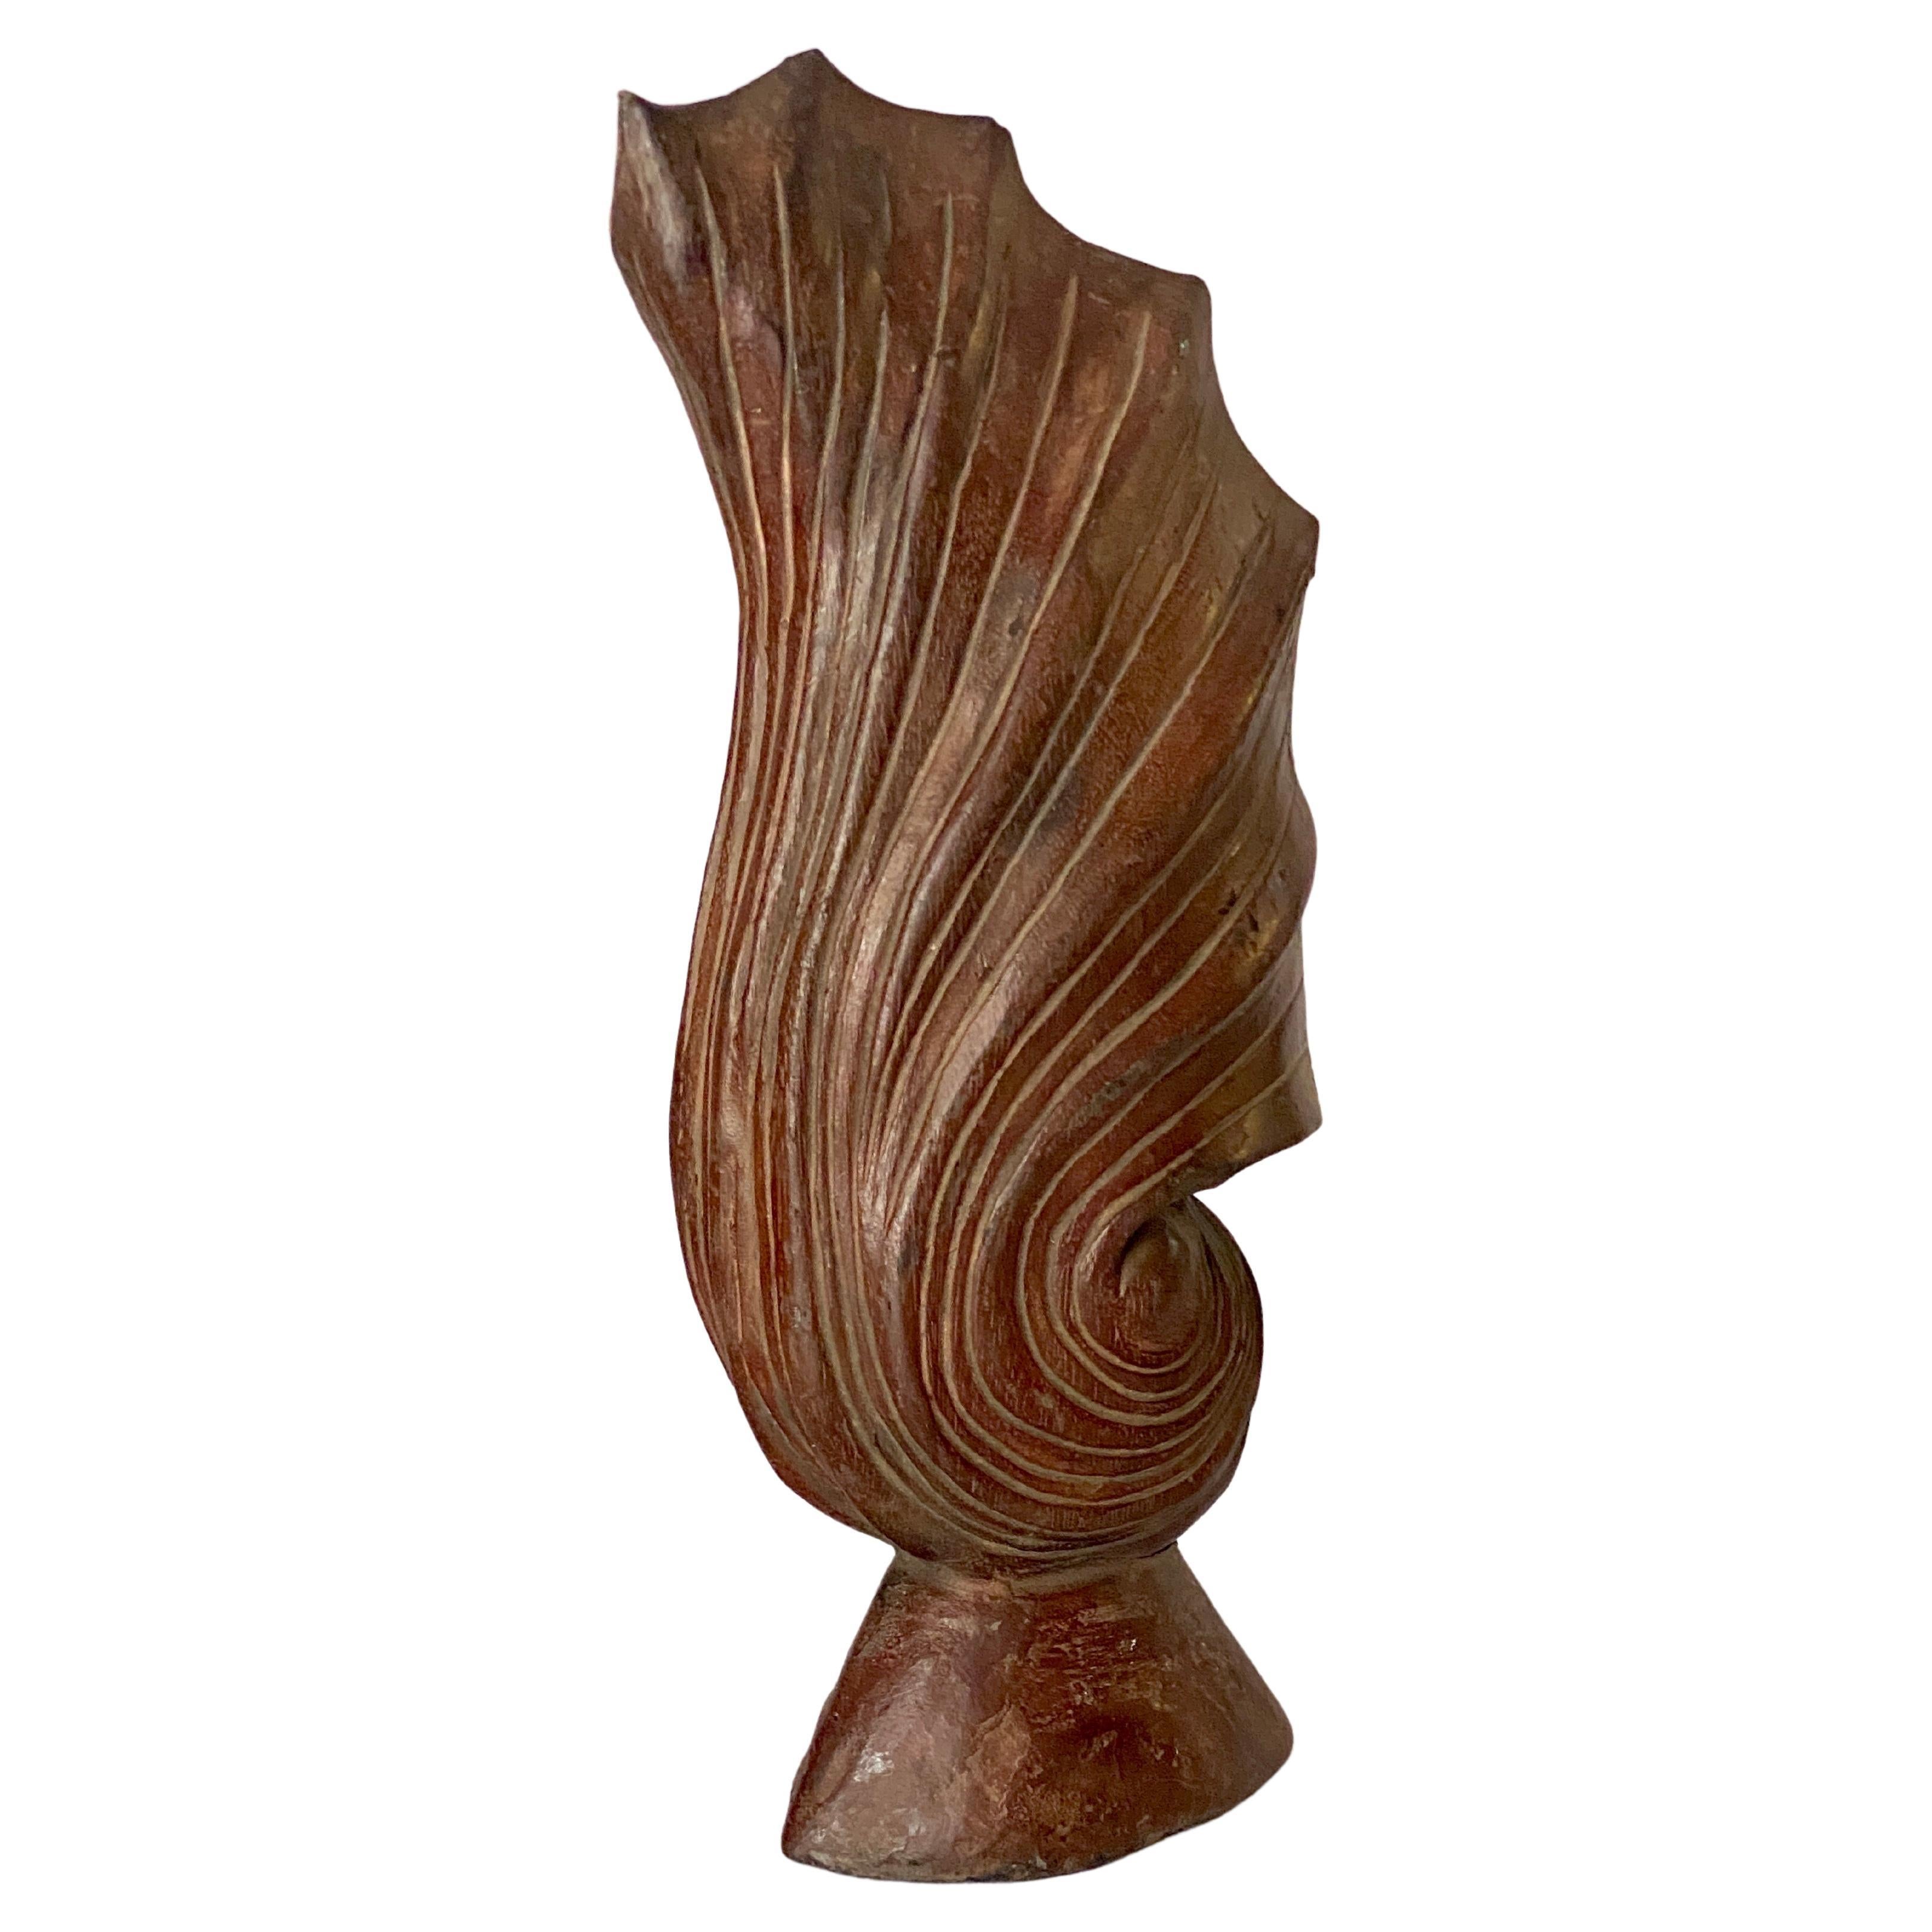 Wood Abstract Sculpture, Shell Shape, Brown Color, France, 1960 For Sale